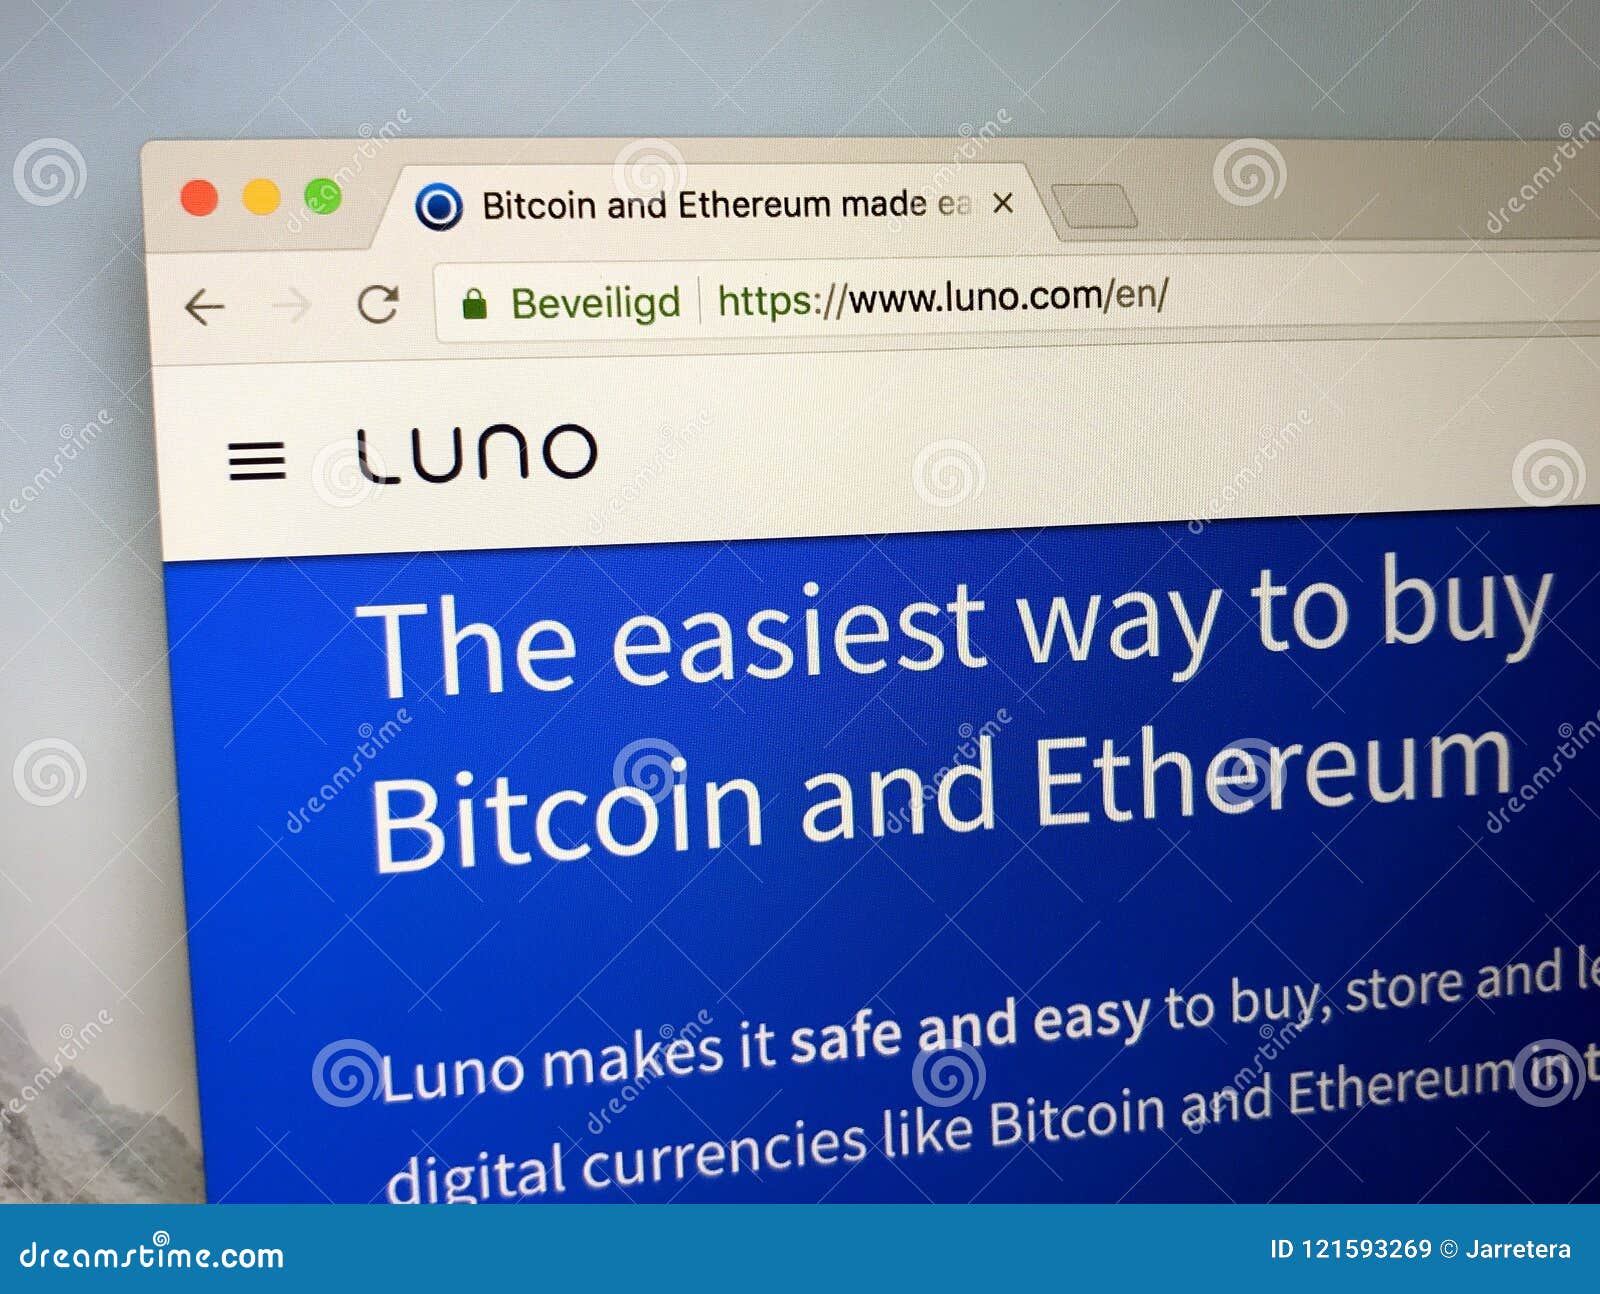 Homepage Of Luno Exchange Editorial Stock Image Image Of Symbol - 